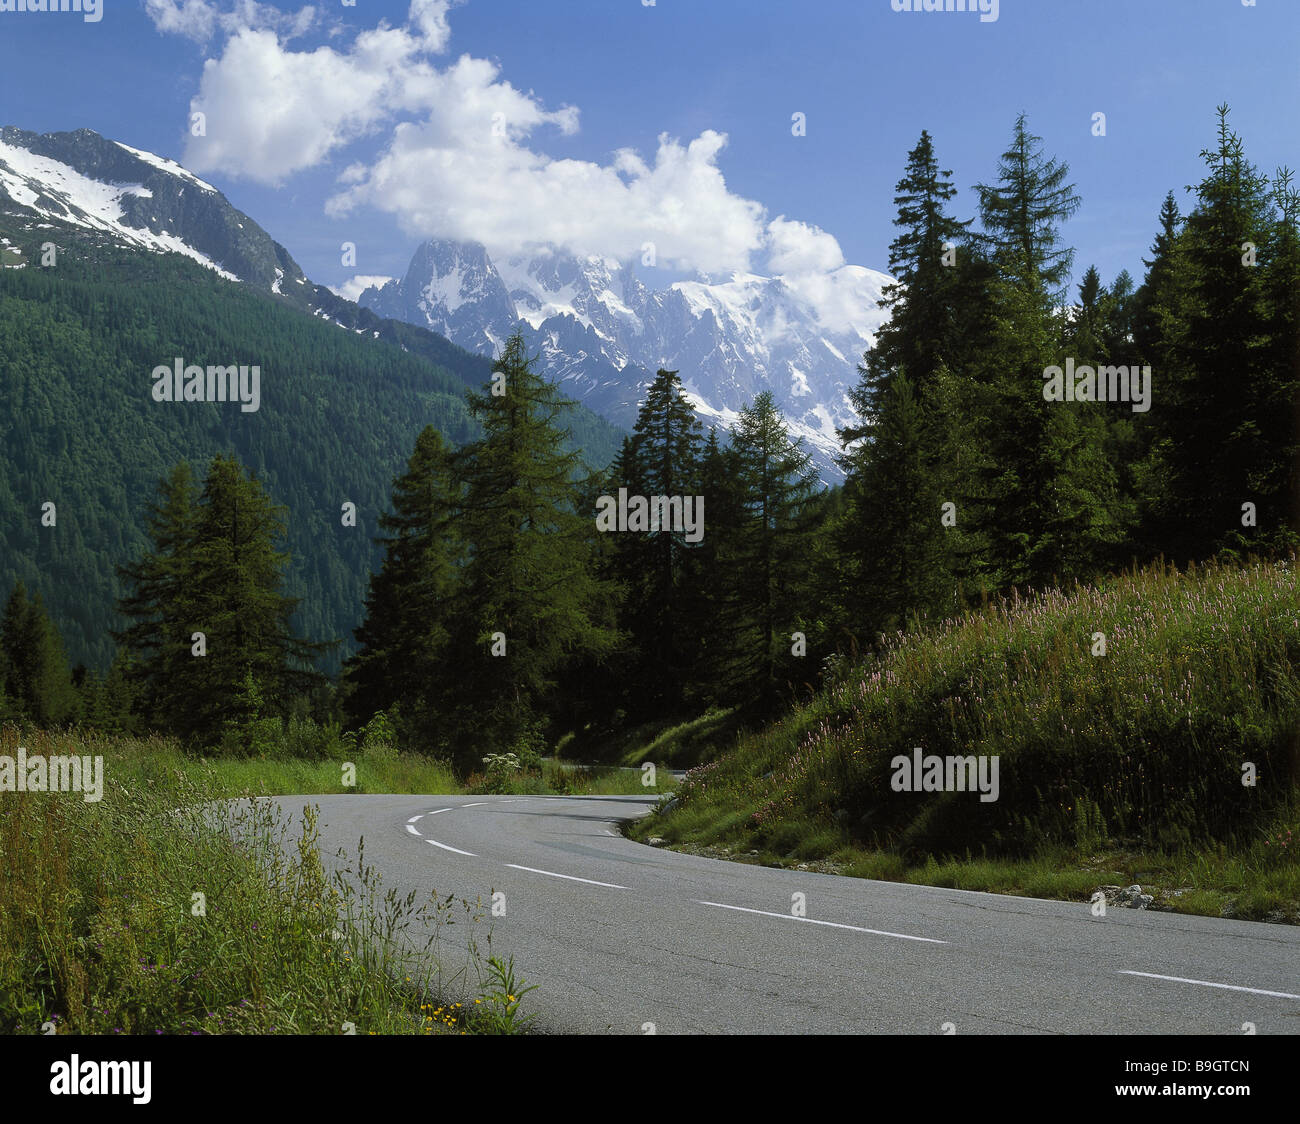 France department haute-savoie Alps streets Col des montets Montblanc clouded sky highway mountain-streets access road view Stock Photo